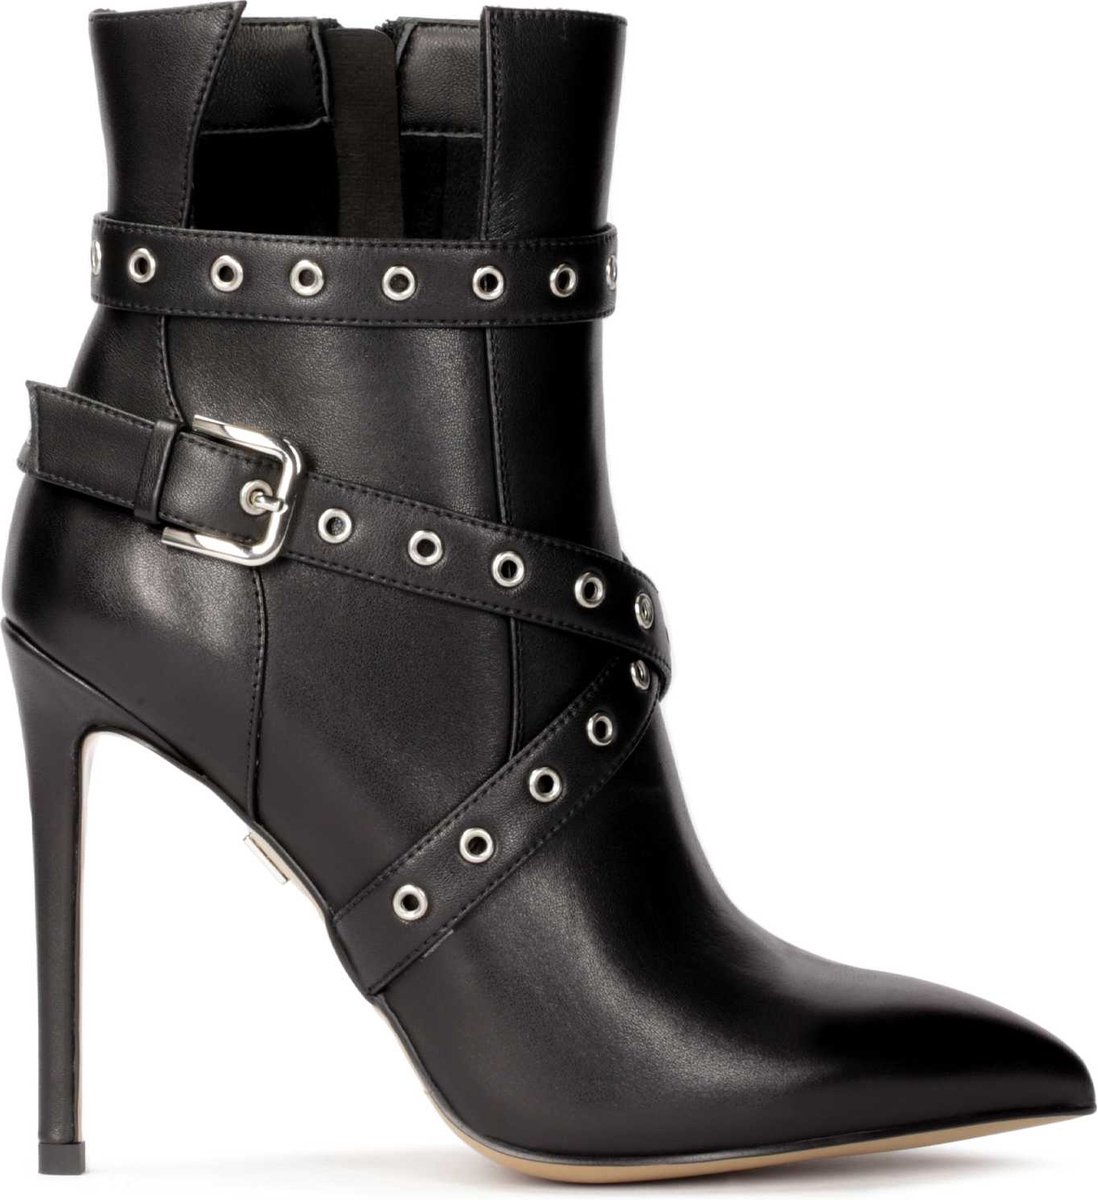 Kazar Stiletto heeled boots laced with riveted strap